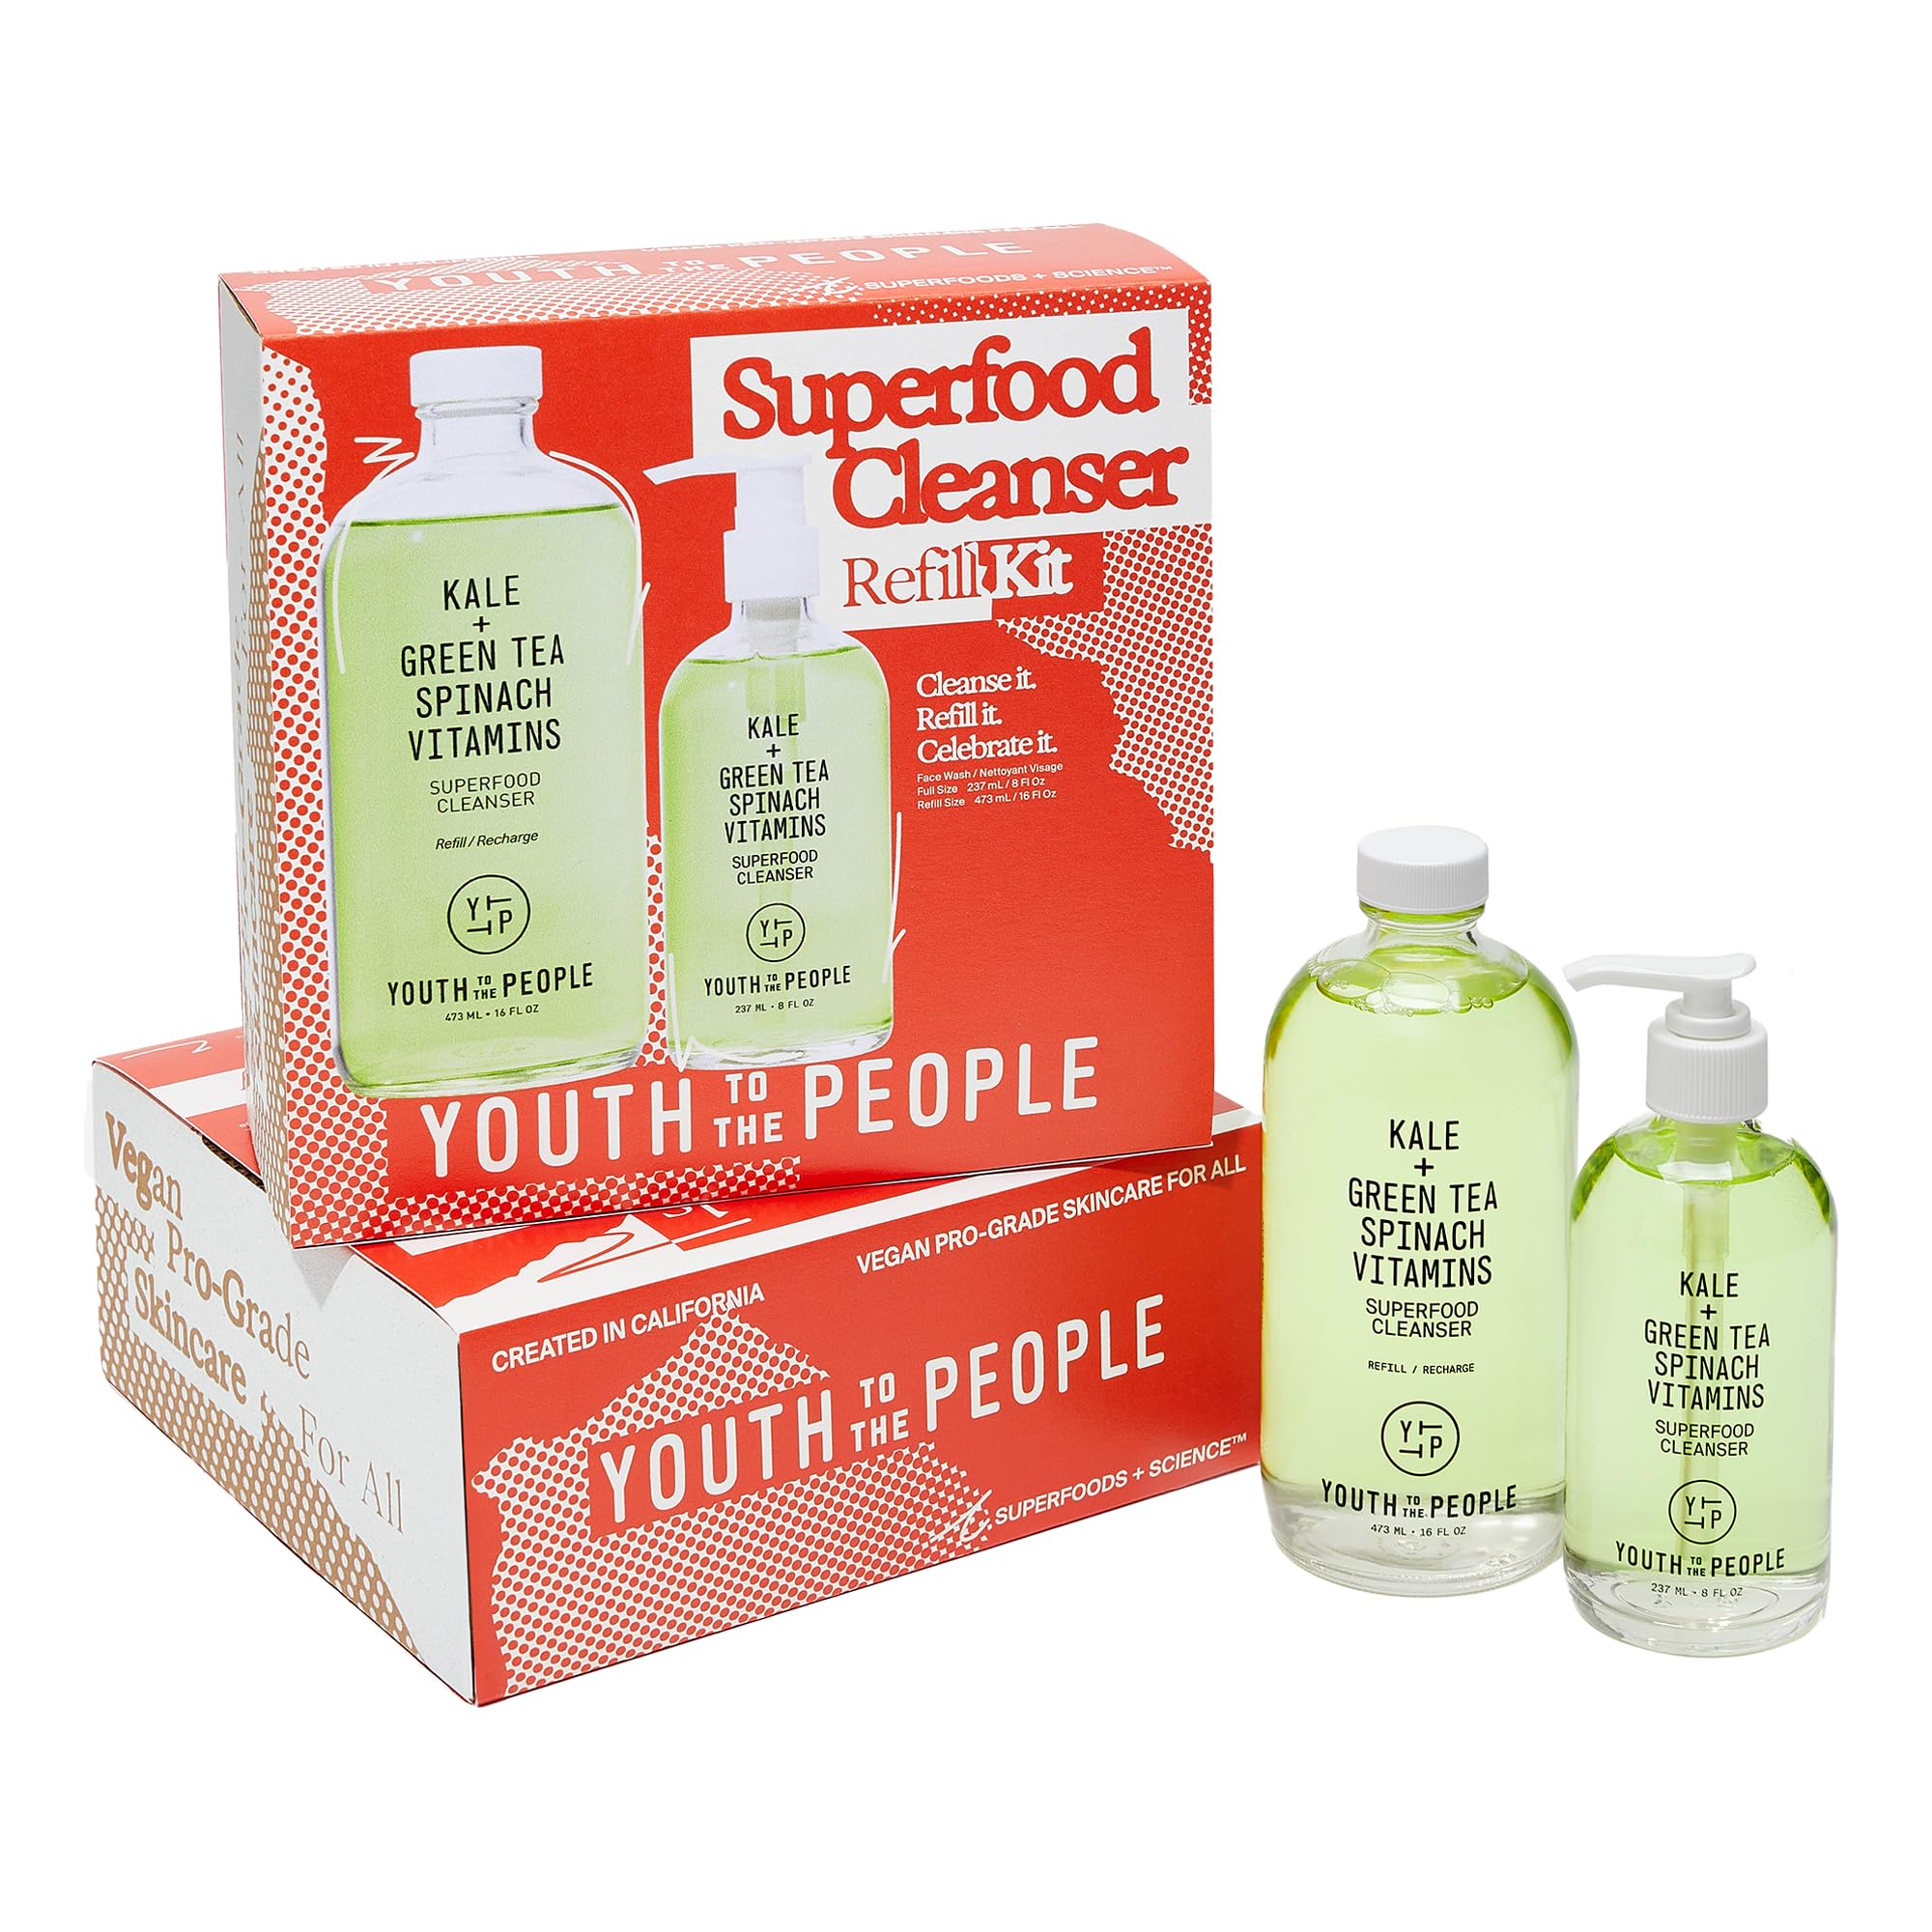 Youth To The People Superfood Cleanser Refill Kit - 8oz Pump Bottle + 16oz Refill - pH Balanced, Non-Drying Gel Face Wash + Makeup Remover for All Skin Types